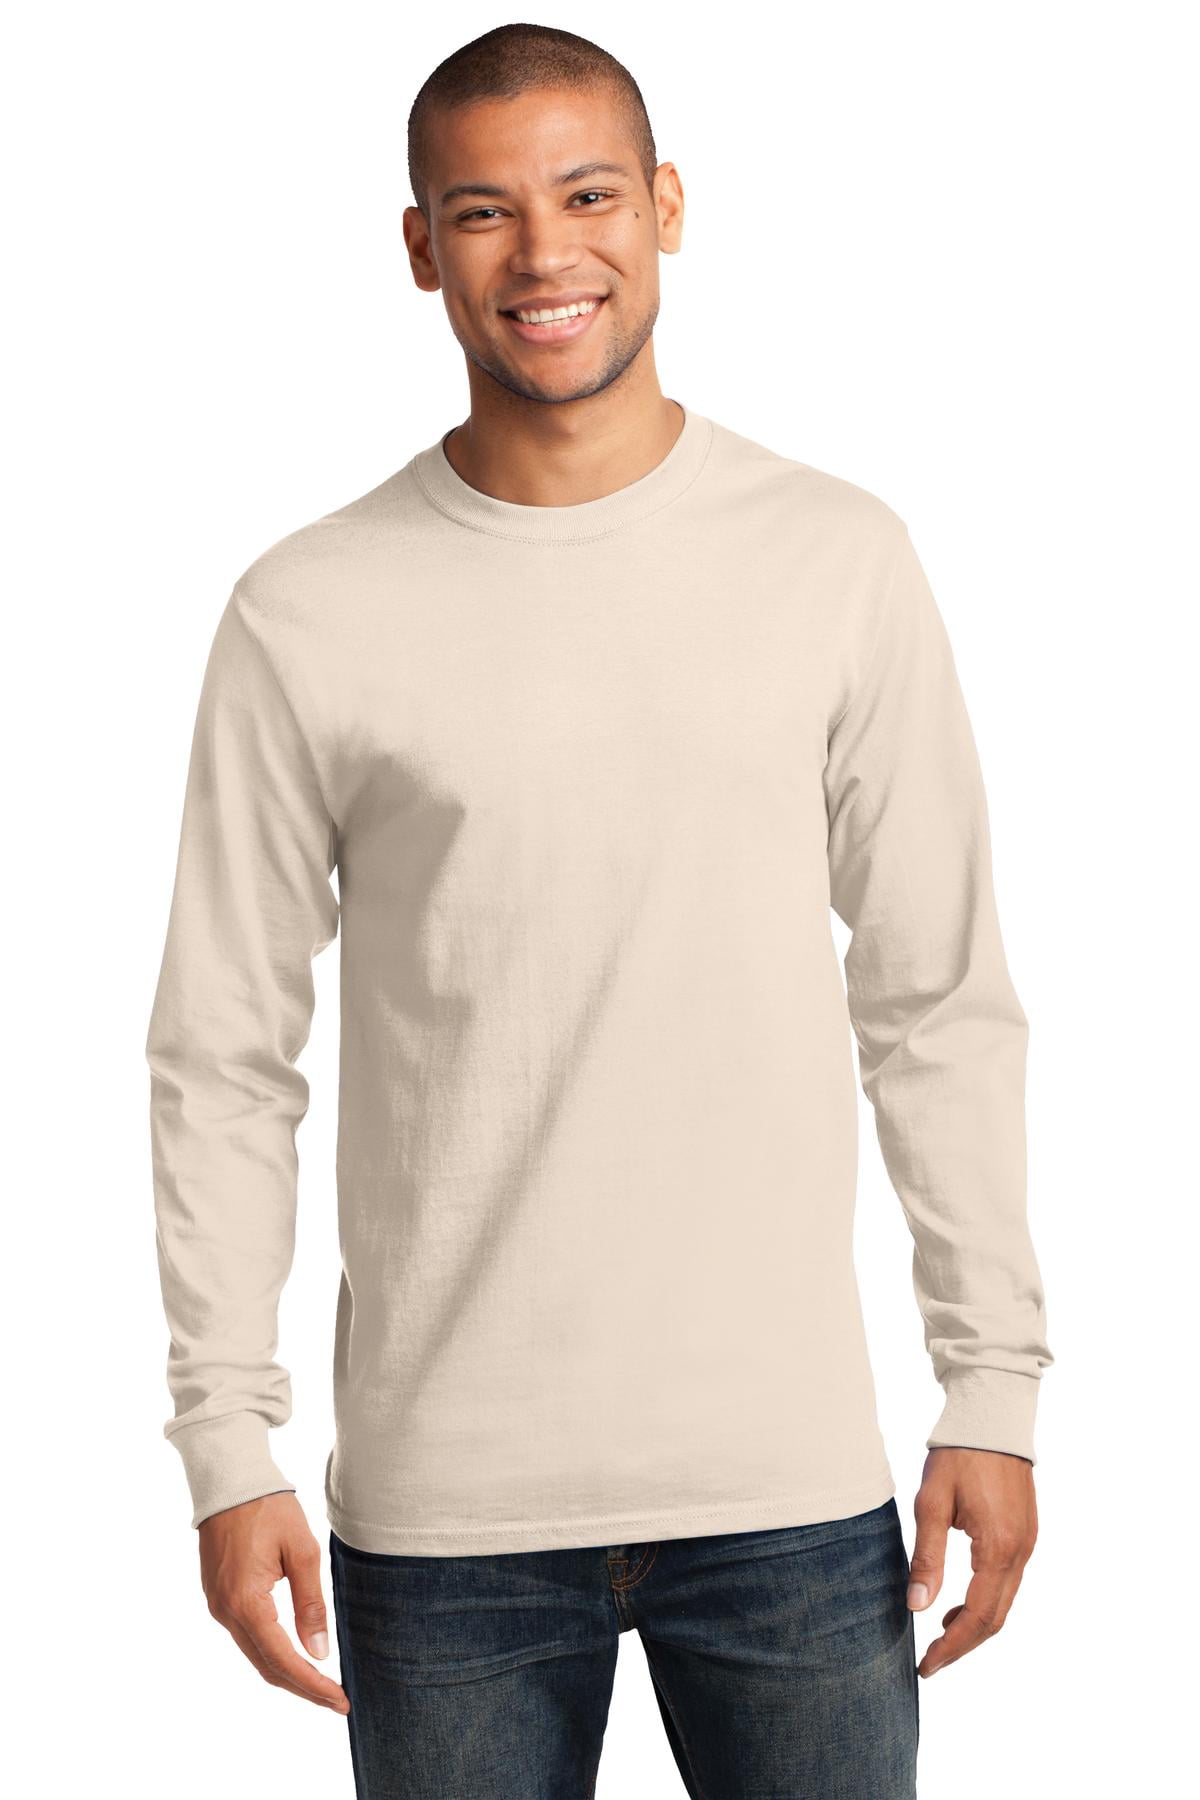 Port & Company Long Sleeve Essential T-Shirt. Natural. M.